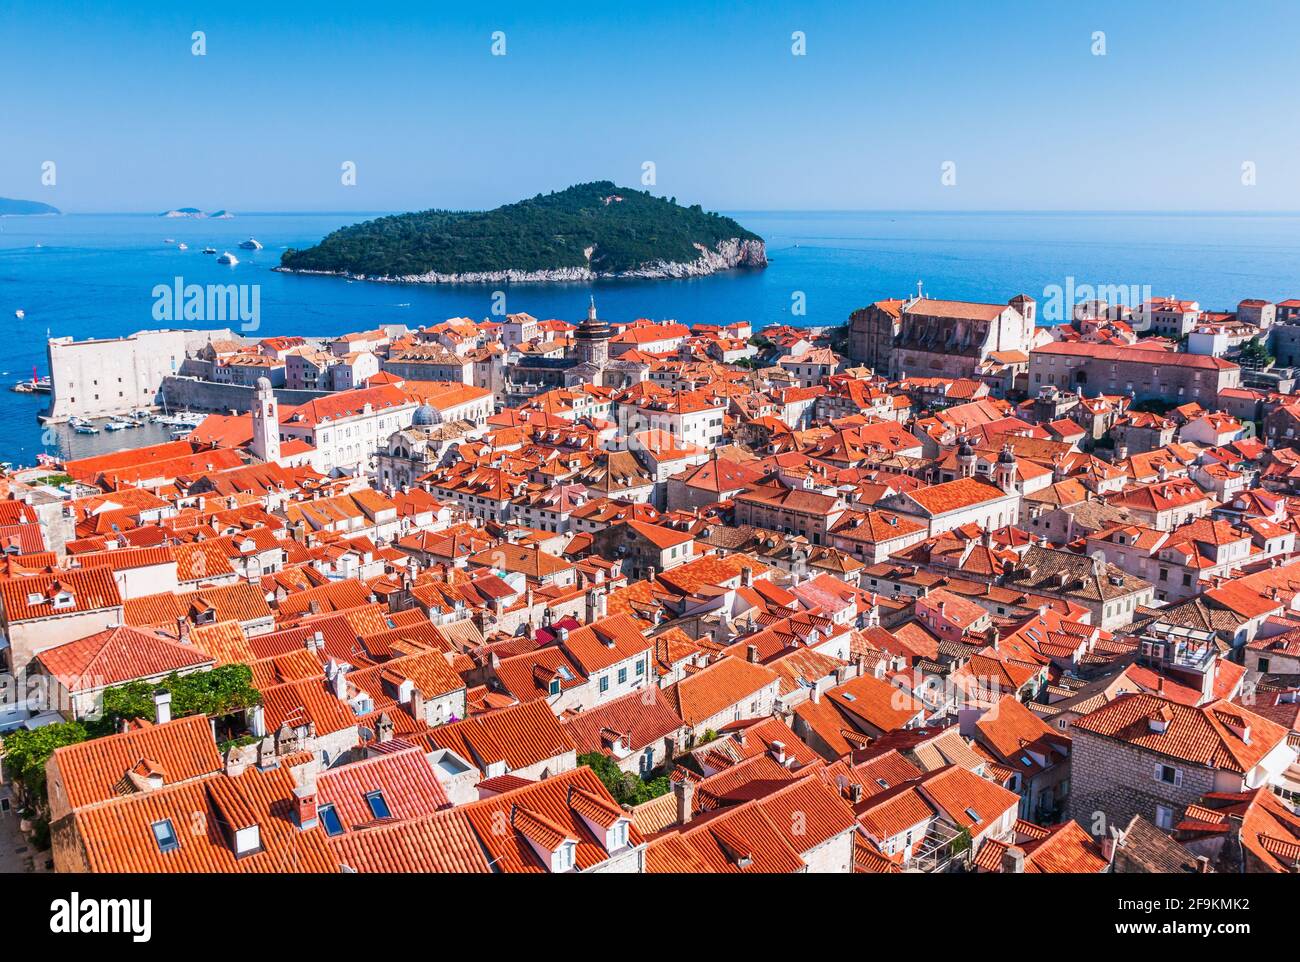 Dubrovnik, Croatia. Panoramic view of the old town Dubrovnik from the City Walls, Croatia. Stock Photo